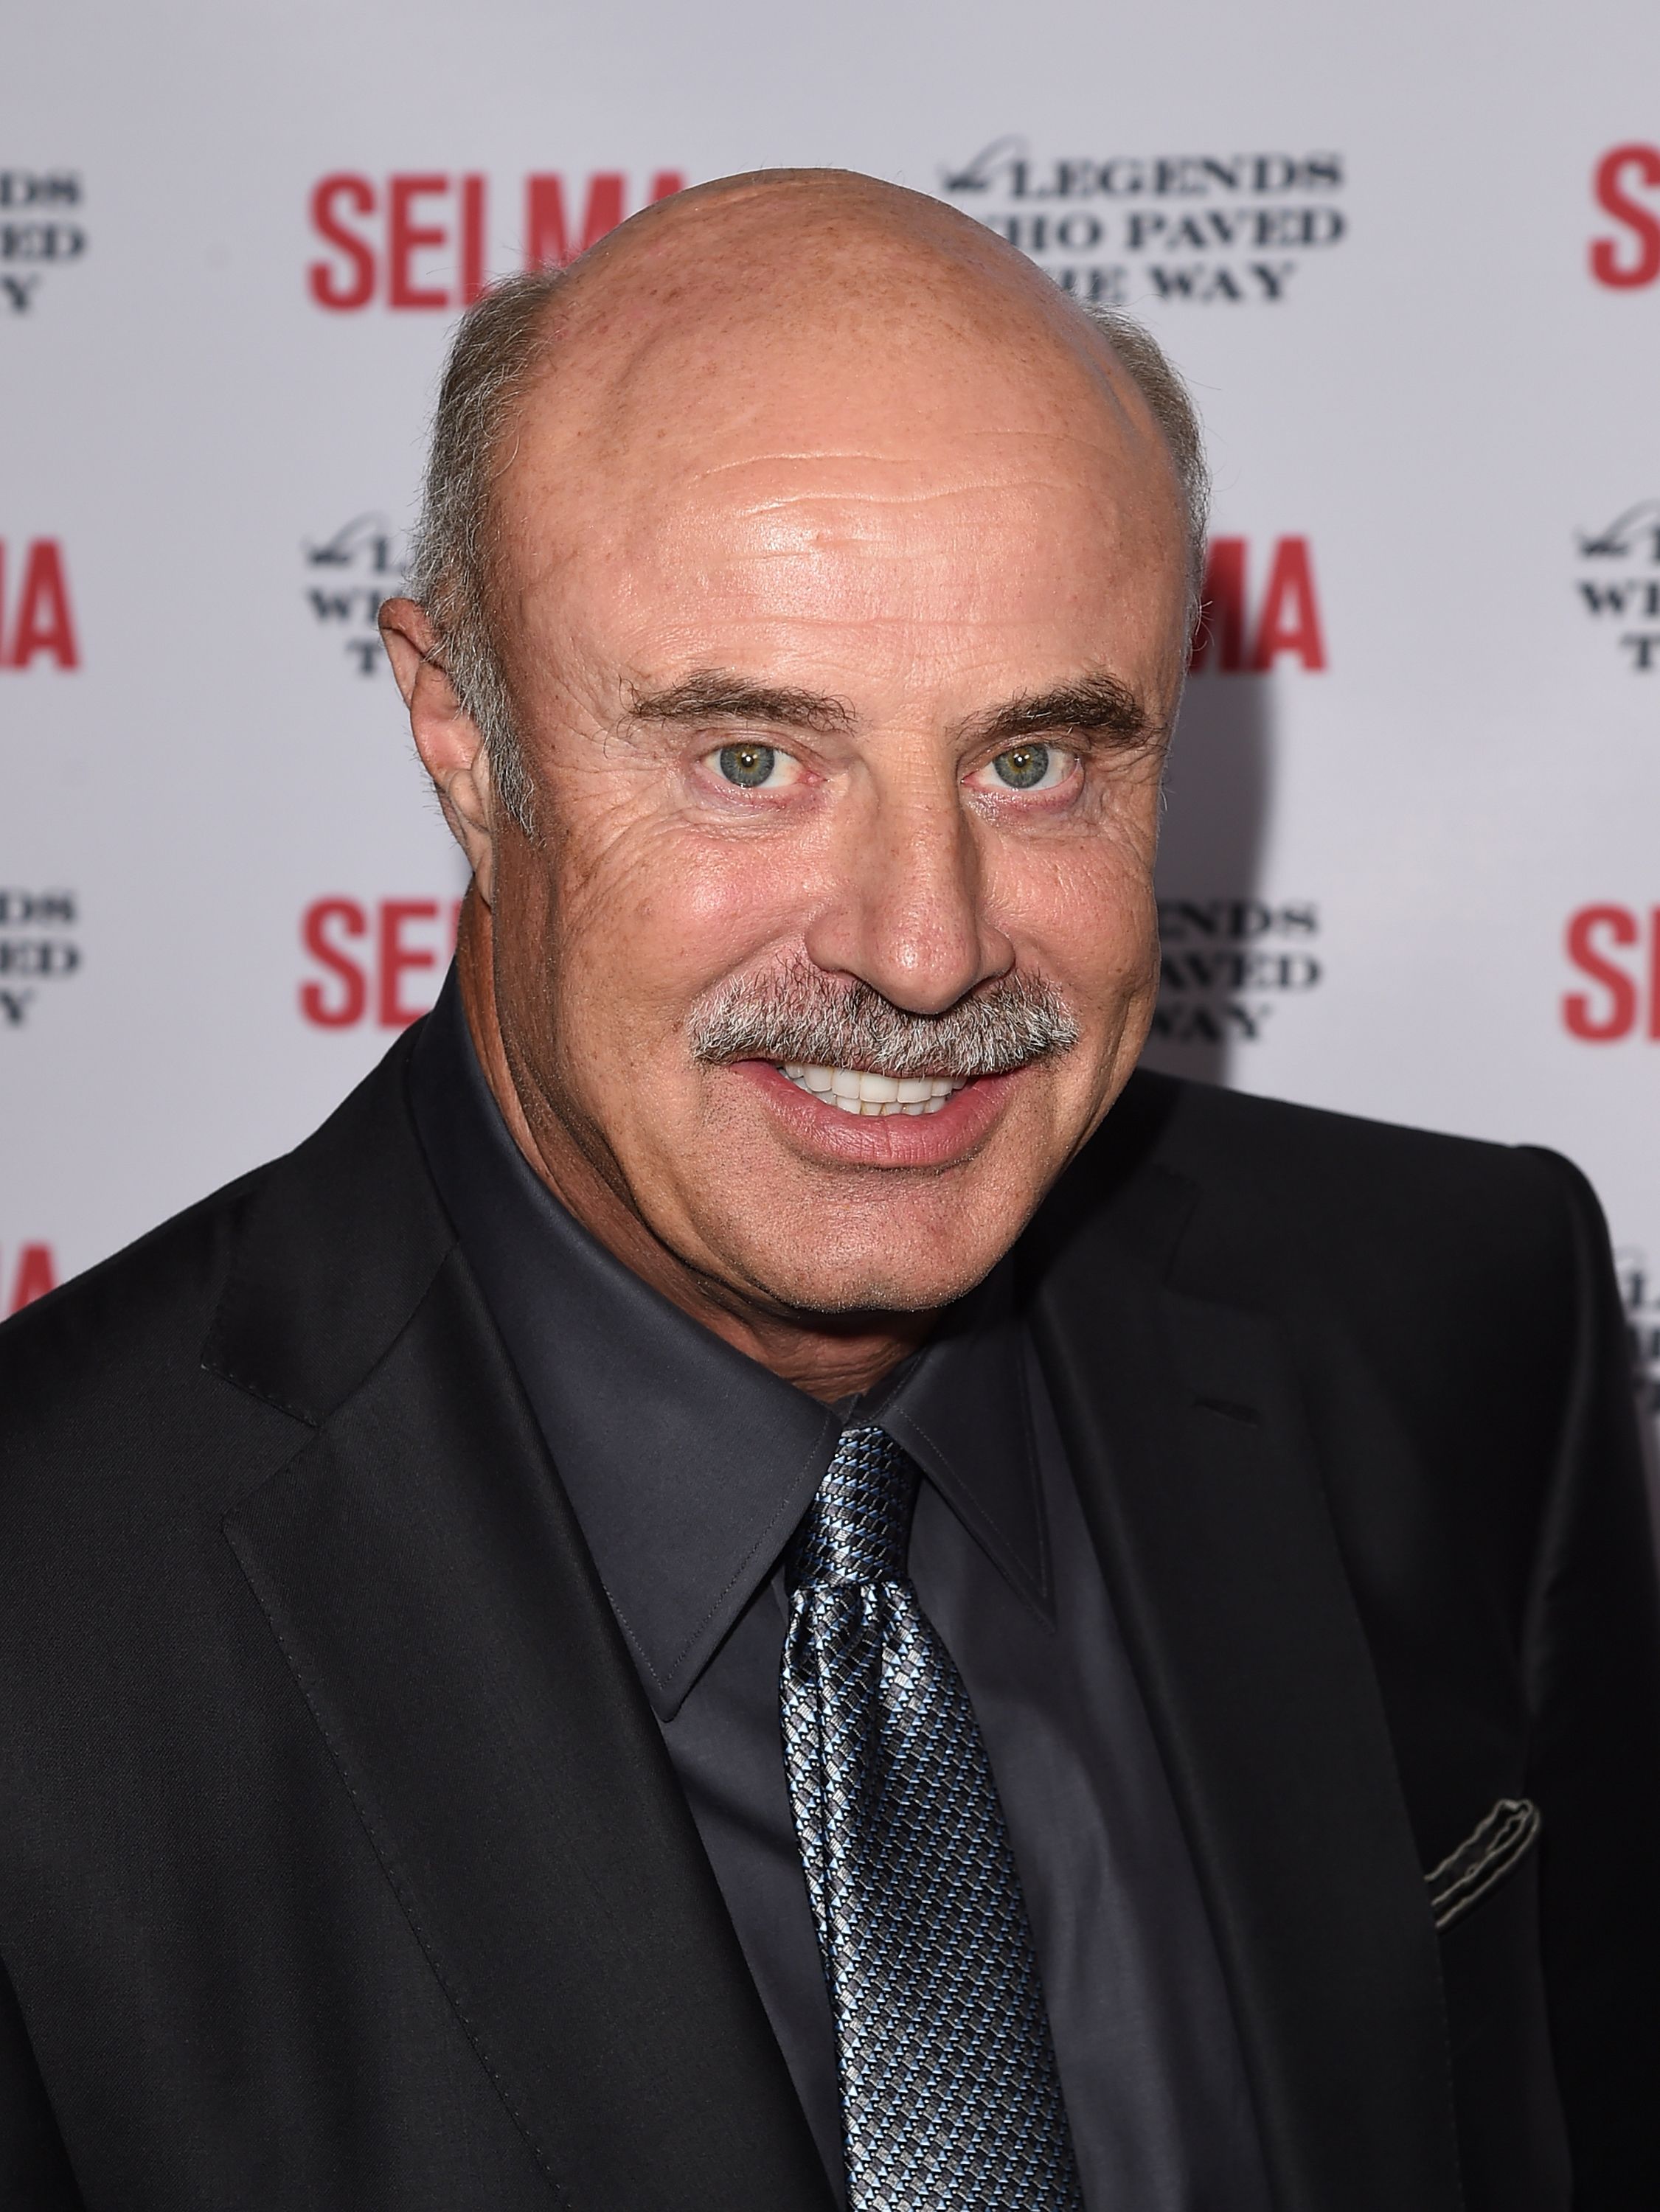 Dr. Phil Announces End Of Talk Show After Two Decades 'Incredible